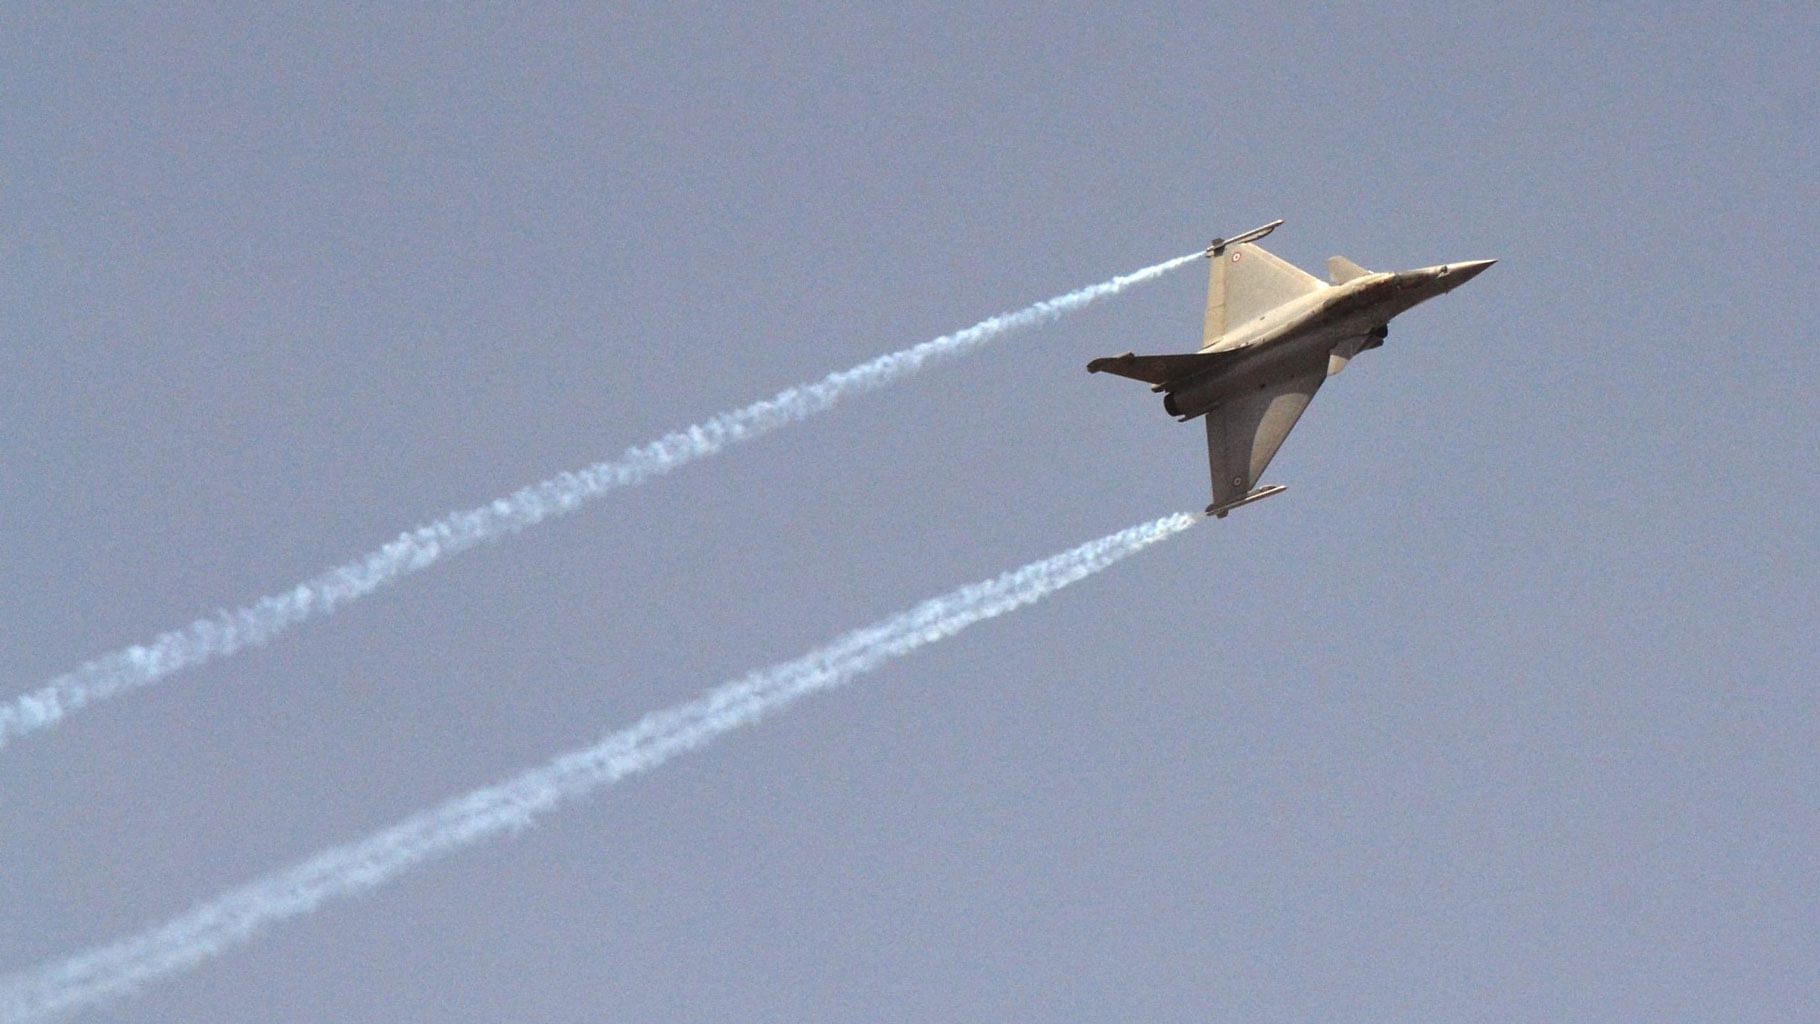 Defence Minister Manohar Parrikar said in March that India was trying to get a “good deal” on Rafale. (Photo: IANS)